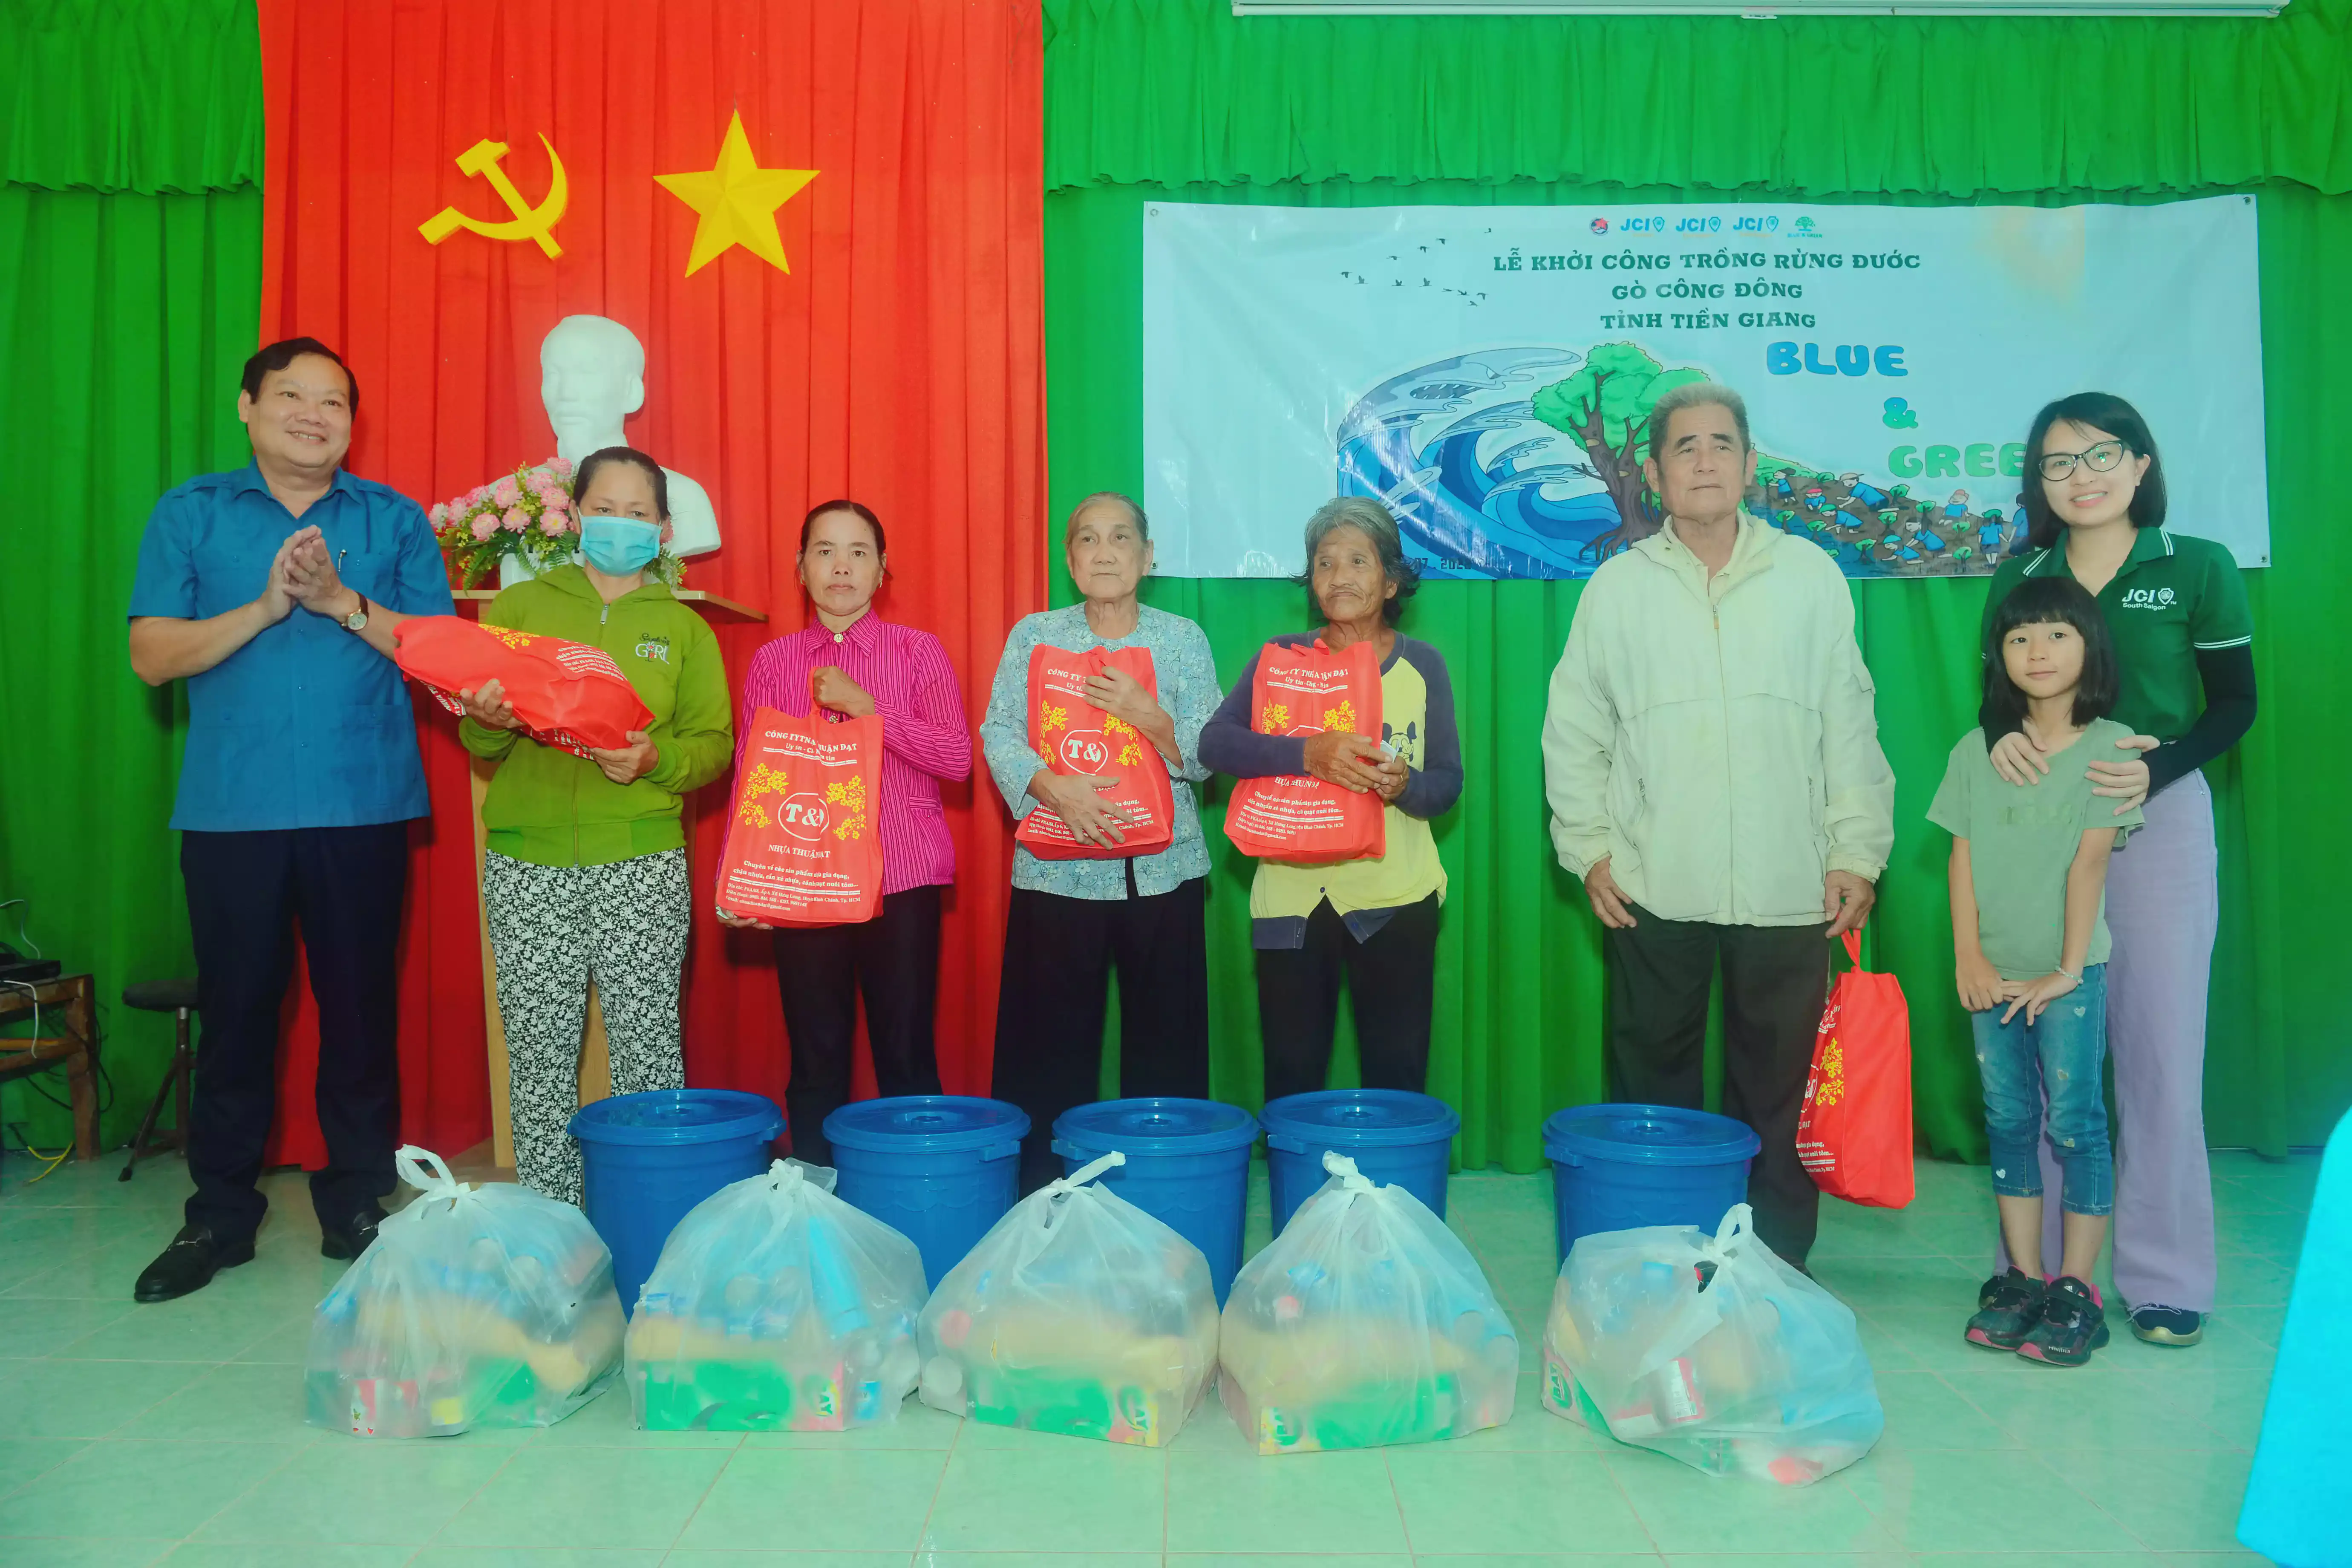 /images/post/asie/asie-sud-est/01-vietnam/07-blue-green-project/meeting/blue_green_project_07.webp